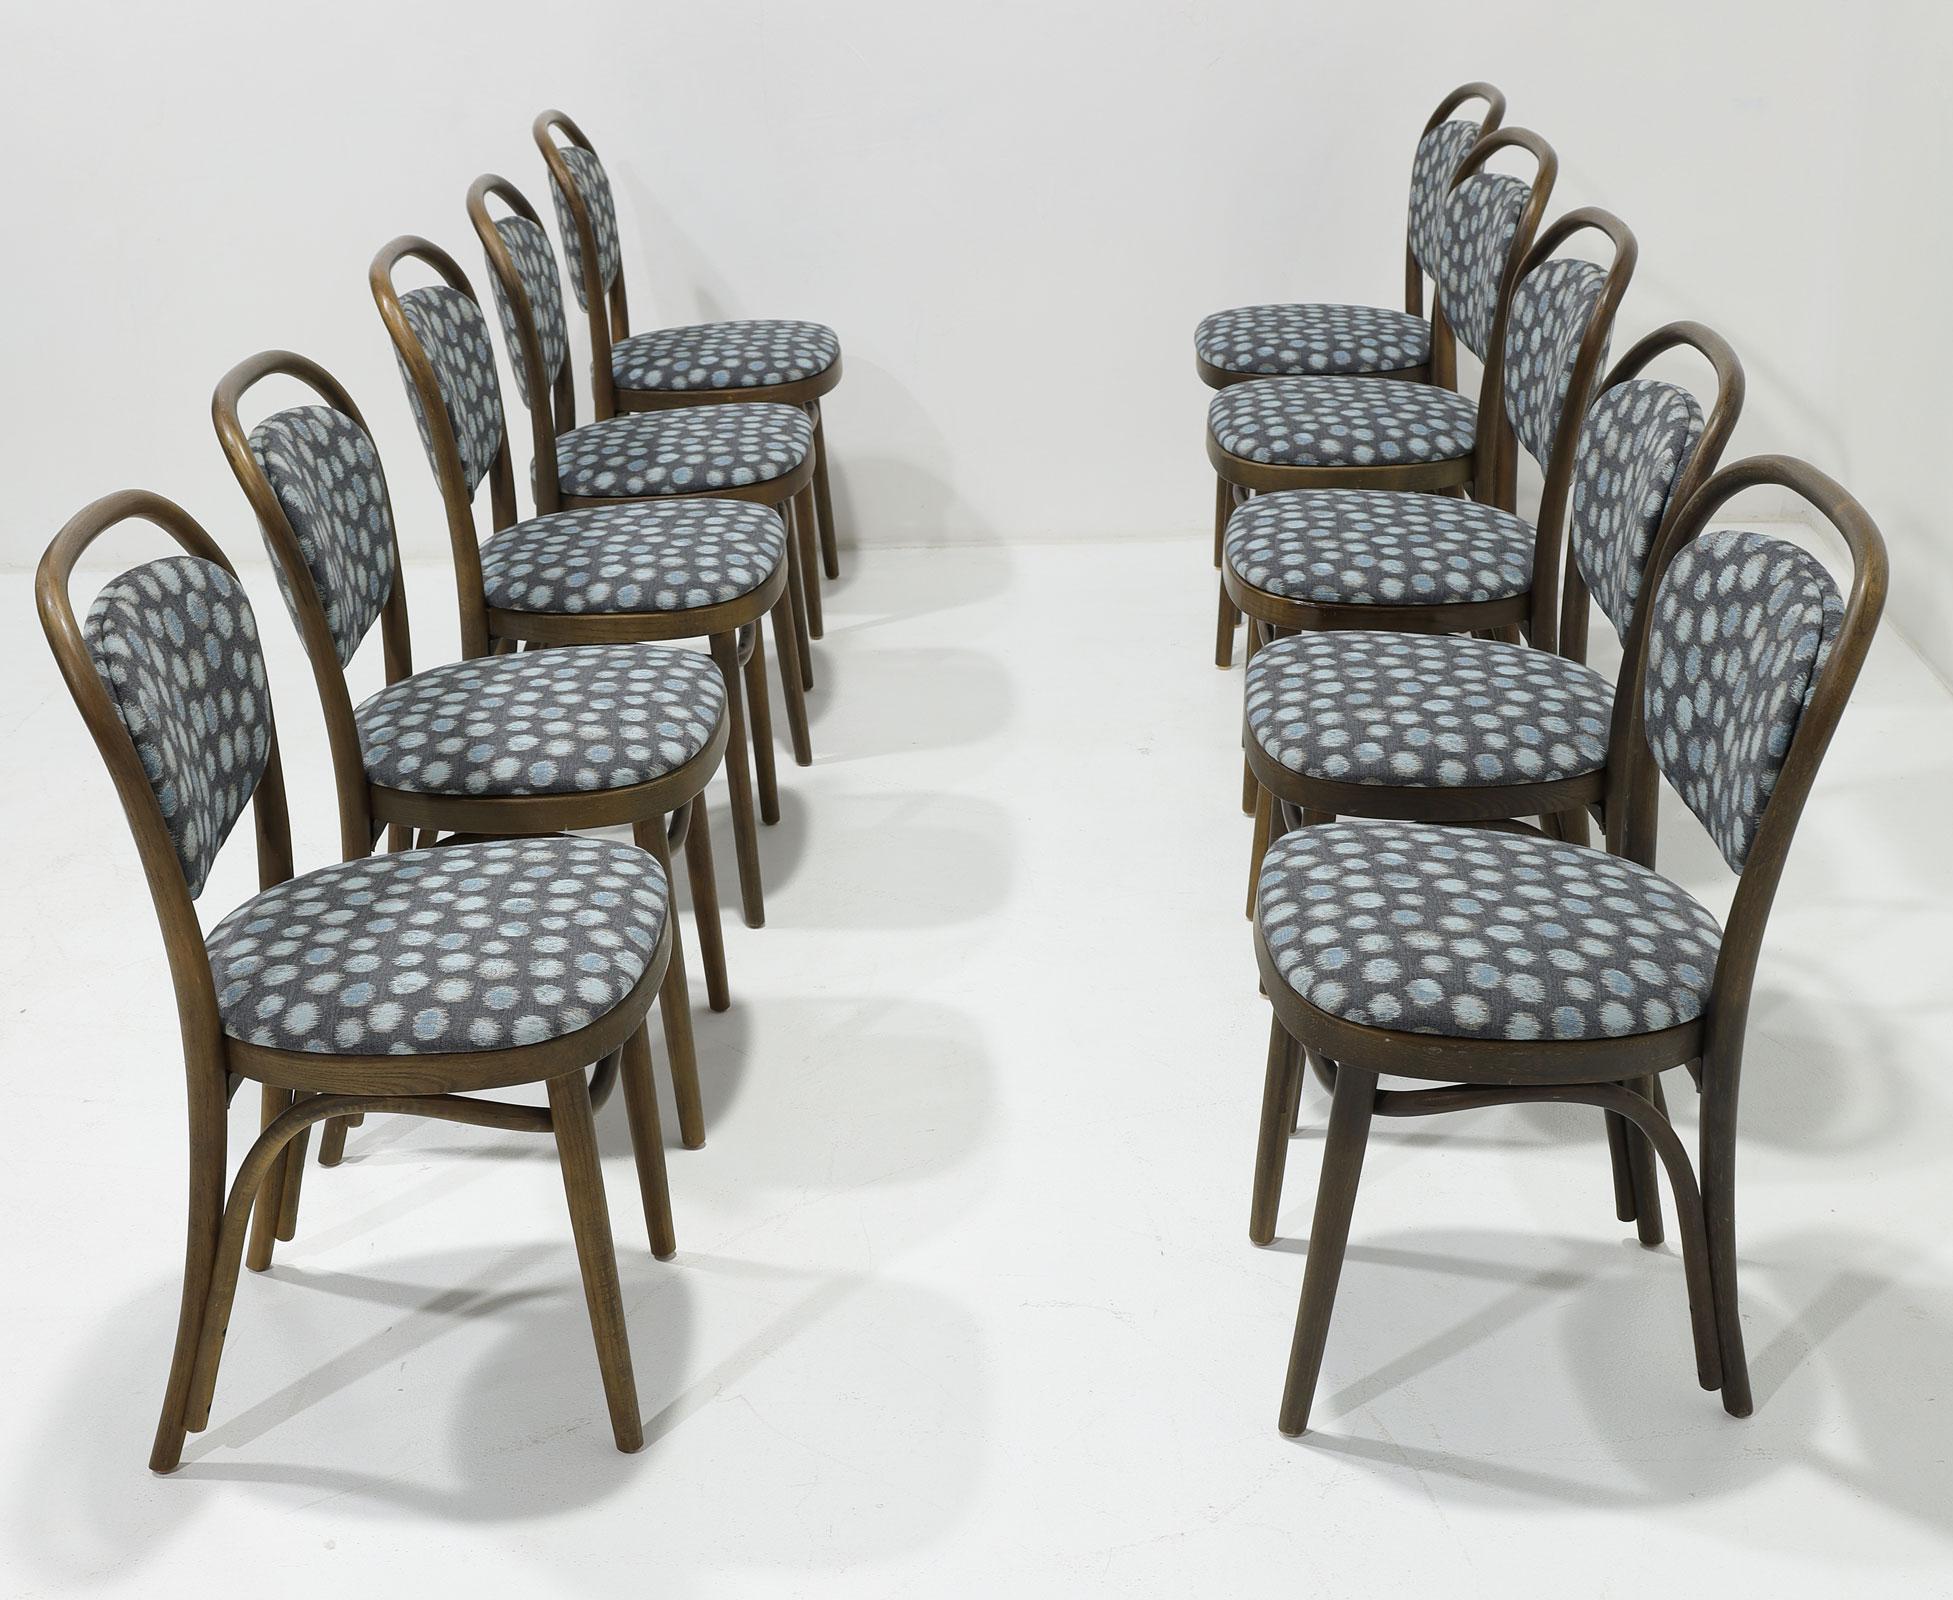 A beautiful set of 10 Thonet bentwood dining chairs. Chairs have a padded seat and back. Great lines !! We have reupholstered in a Perennials Performance fabric with blues, grays and brown. 